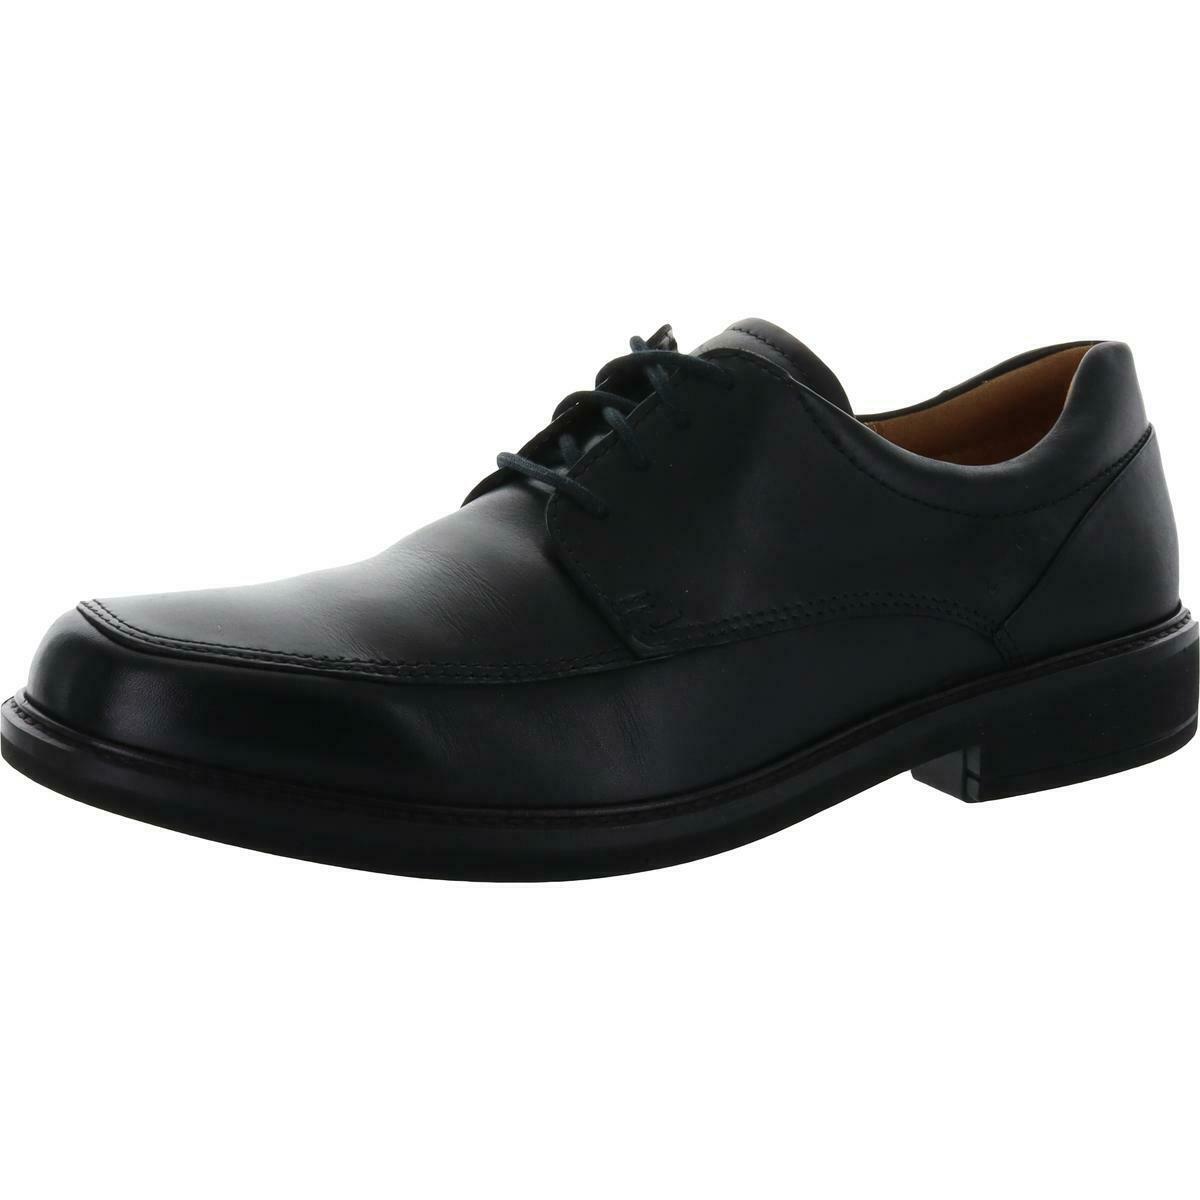 ECCO Mens Black Leather Formal Lace-Up Shoes Derby 45 Medium (D) BHFO 0726